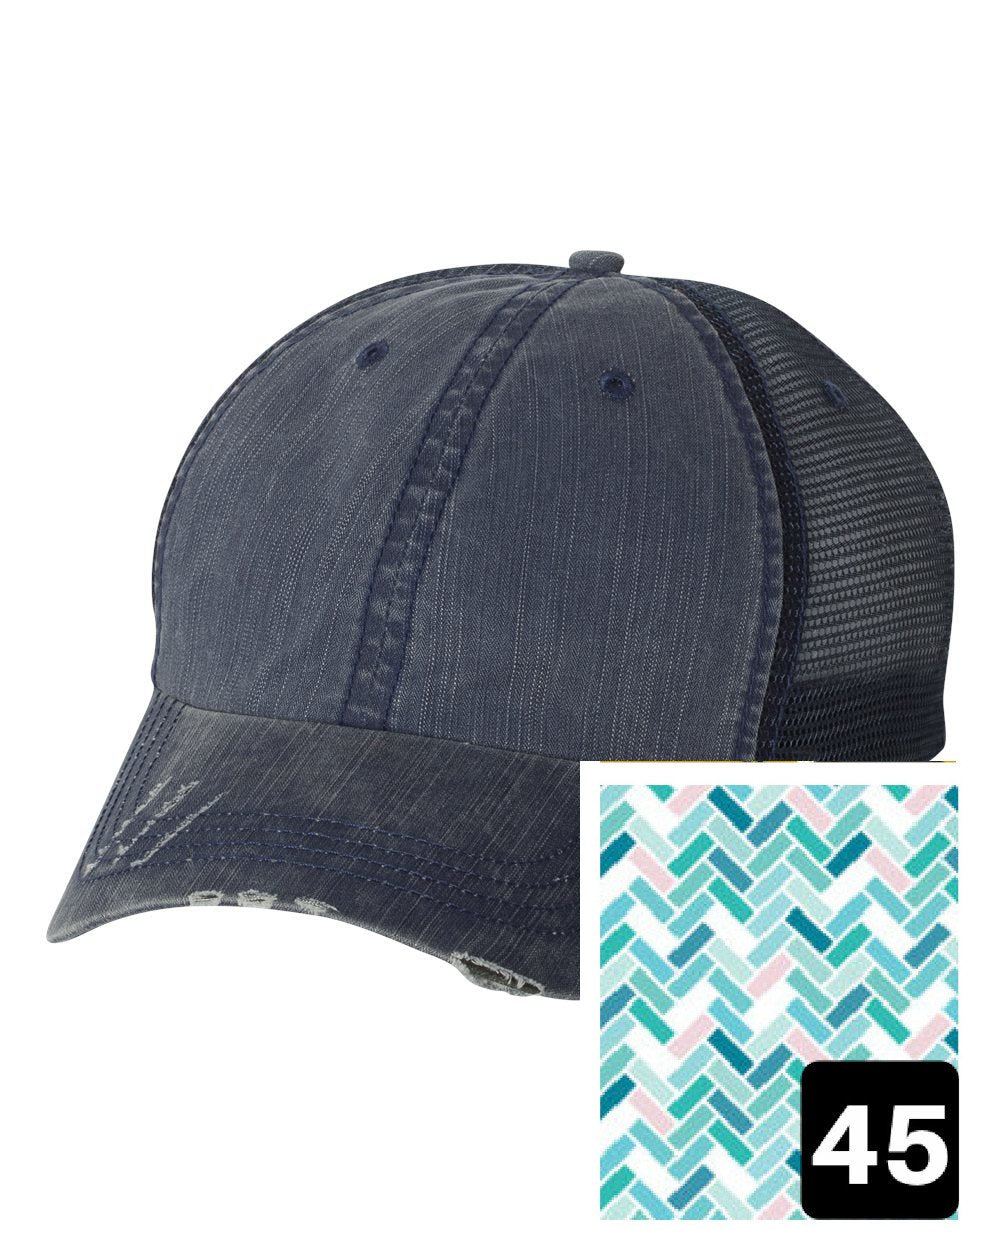 Wisconsin Hat - Distressed Ponytail or Messy Bun Hat  - Many Fabric Choices